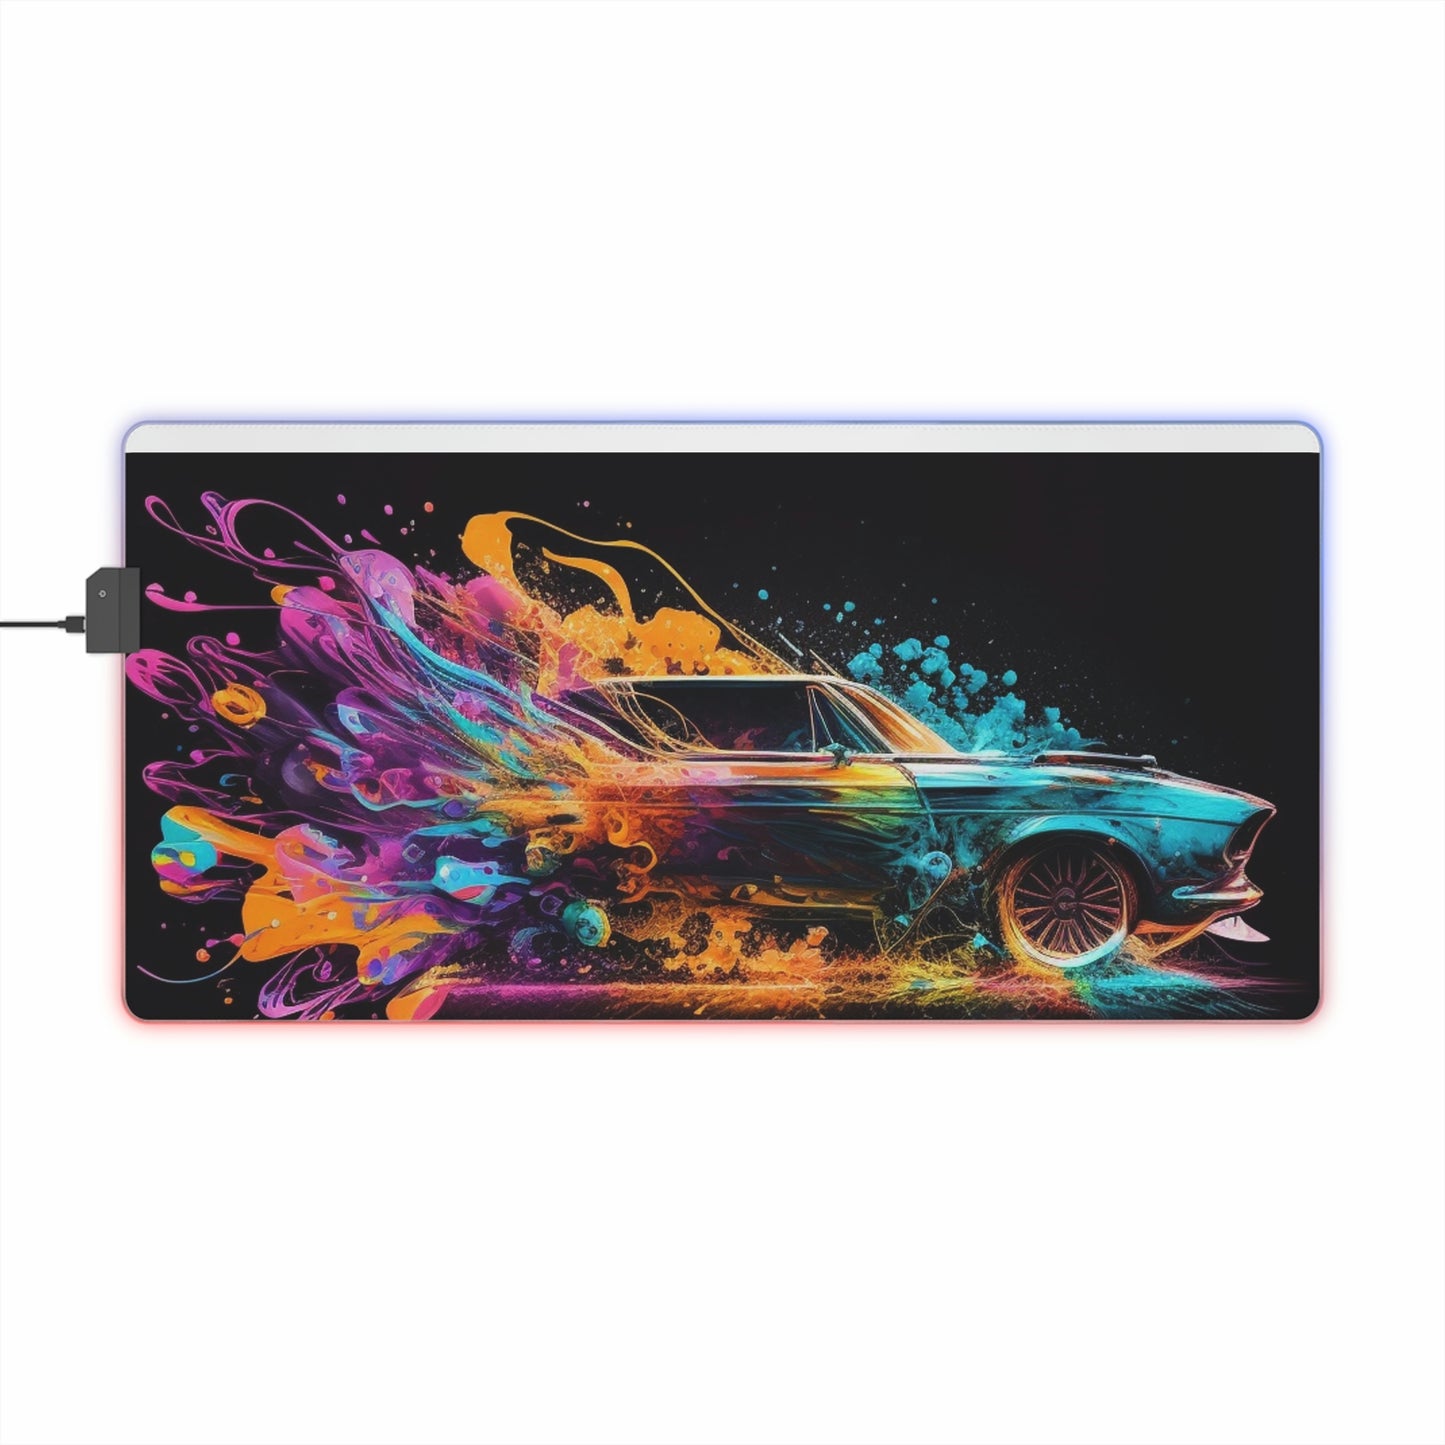 LED Gaming Mouse Pad Hotrod Color 4